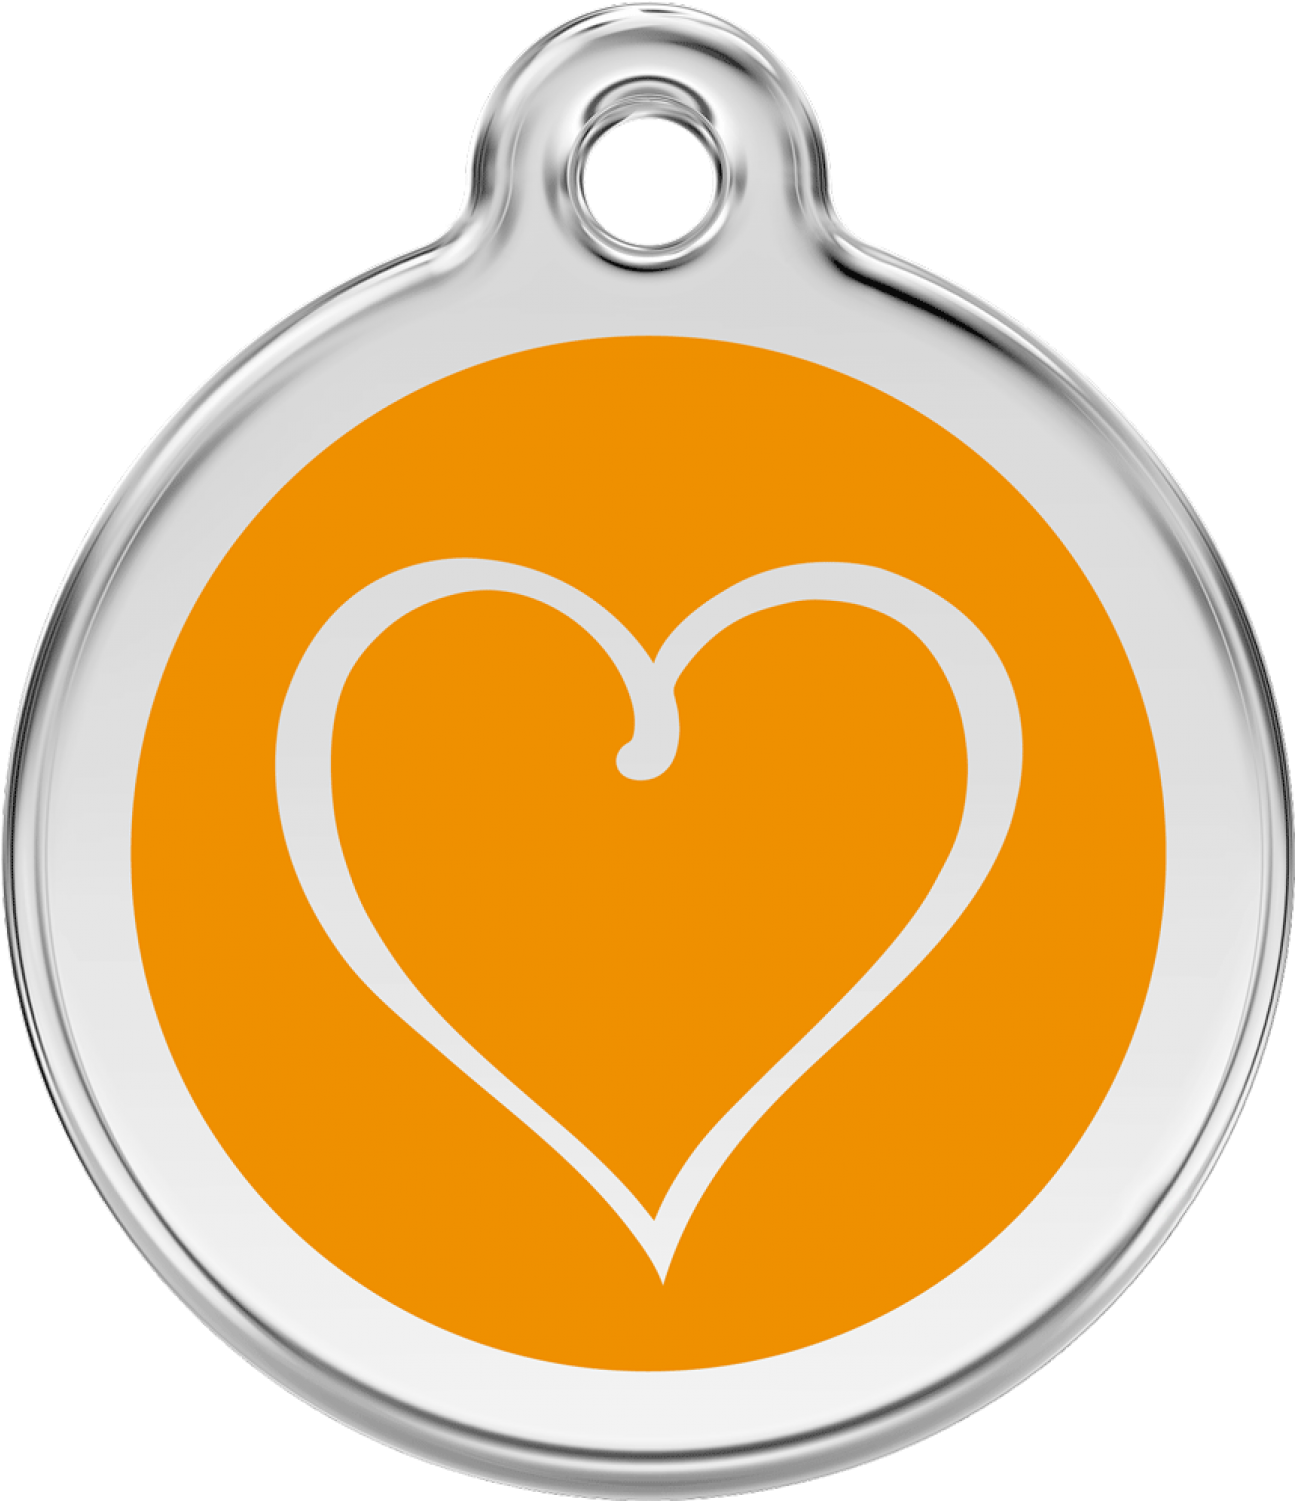 Red Dingo Stainless Steel Enameled Engraved Id Tag - Red Dingo Tribal Heart Pet Id Tag - Orange (1500x1500)